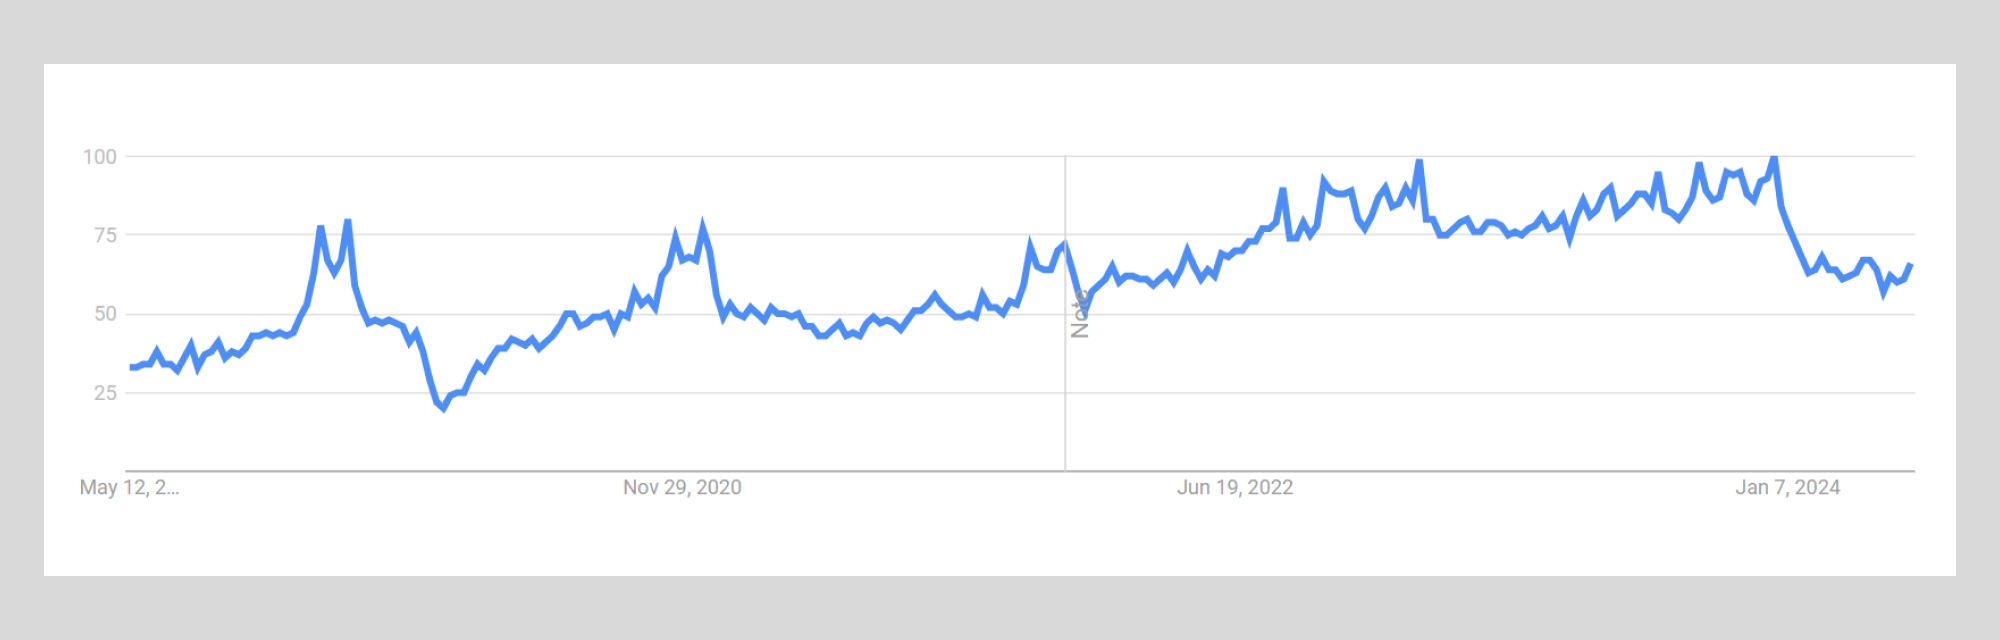 skin care products-google trends